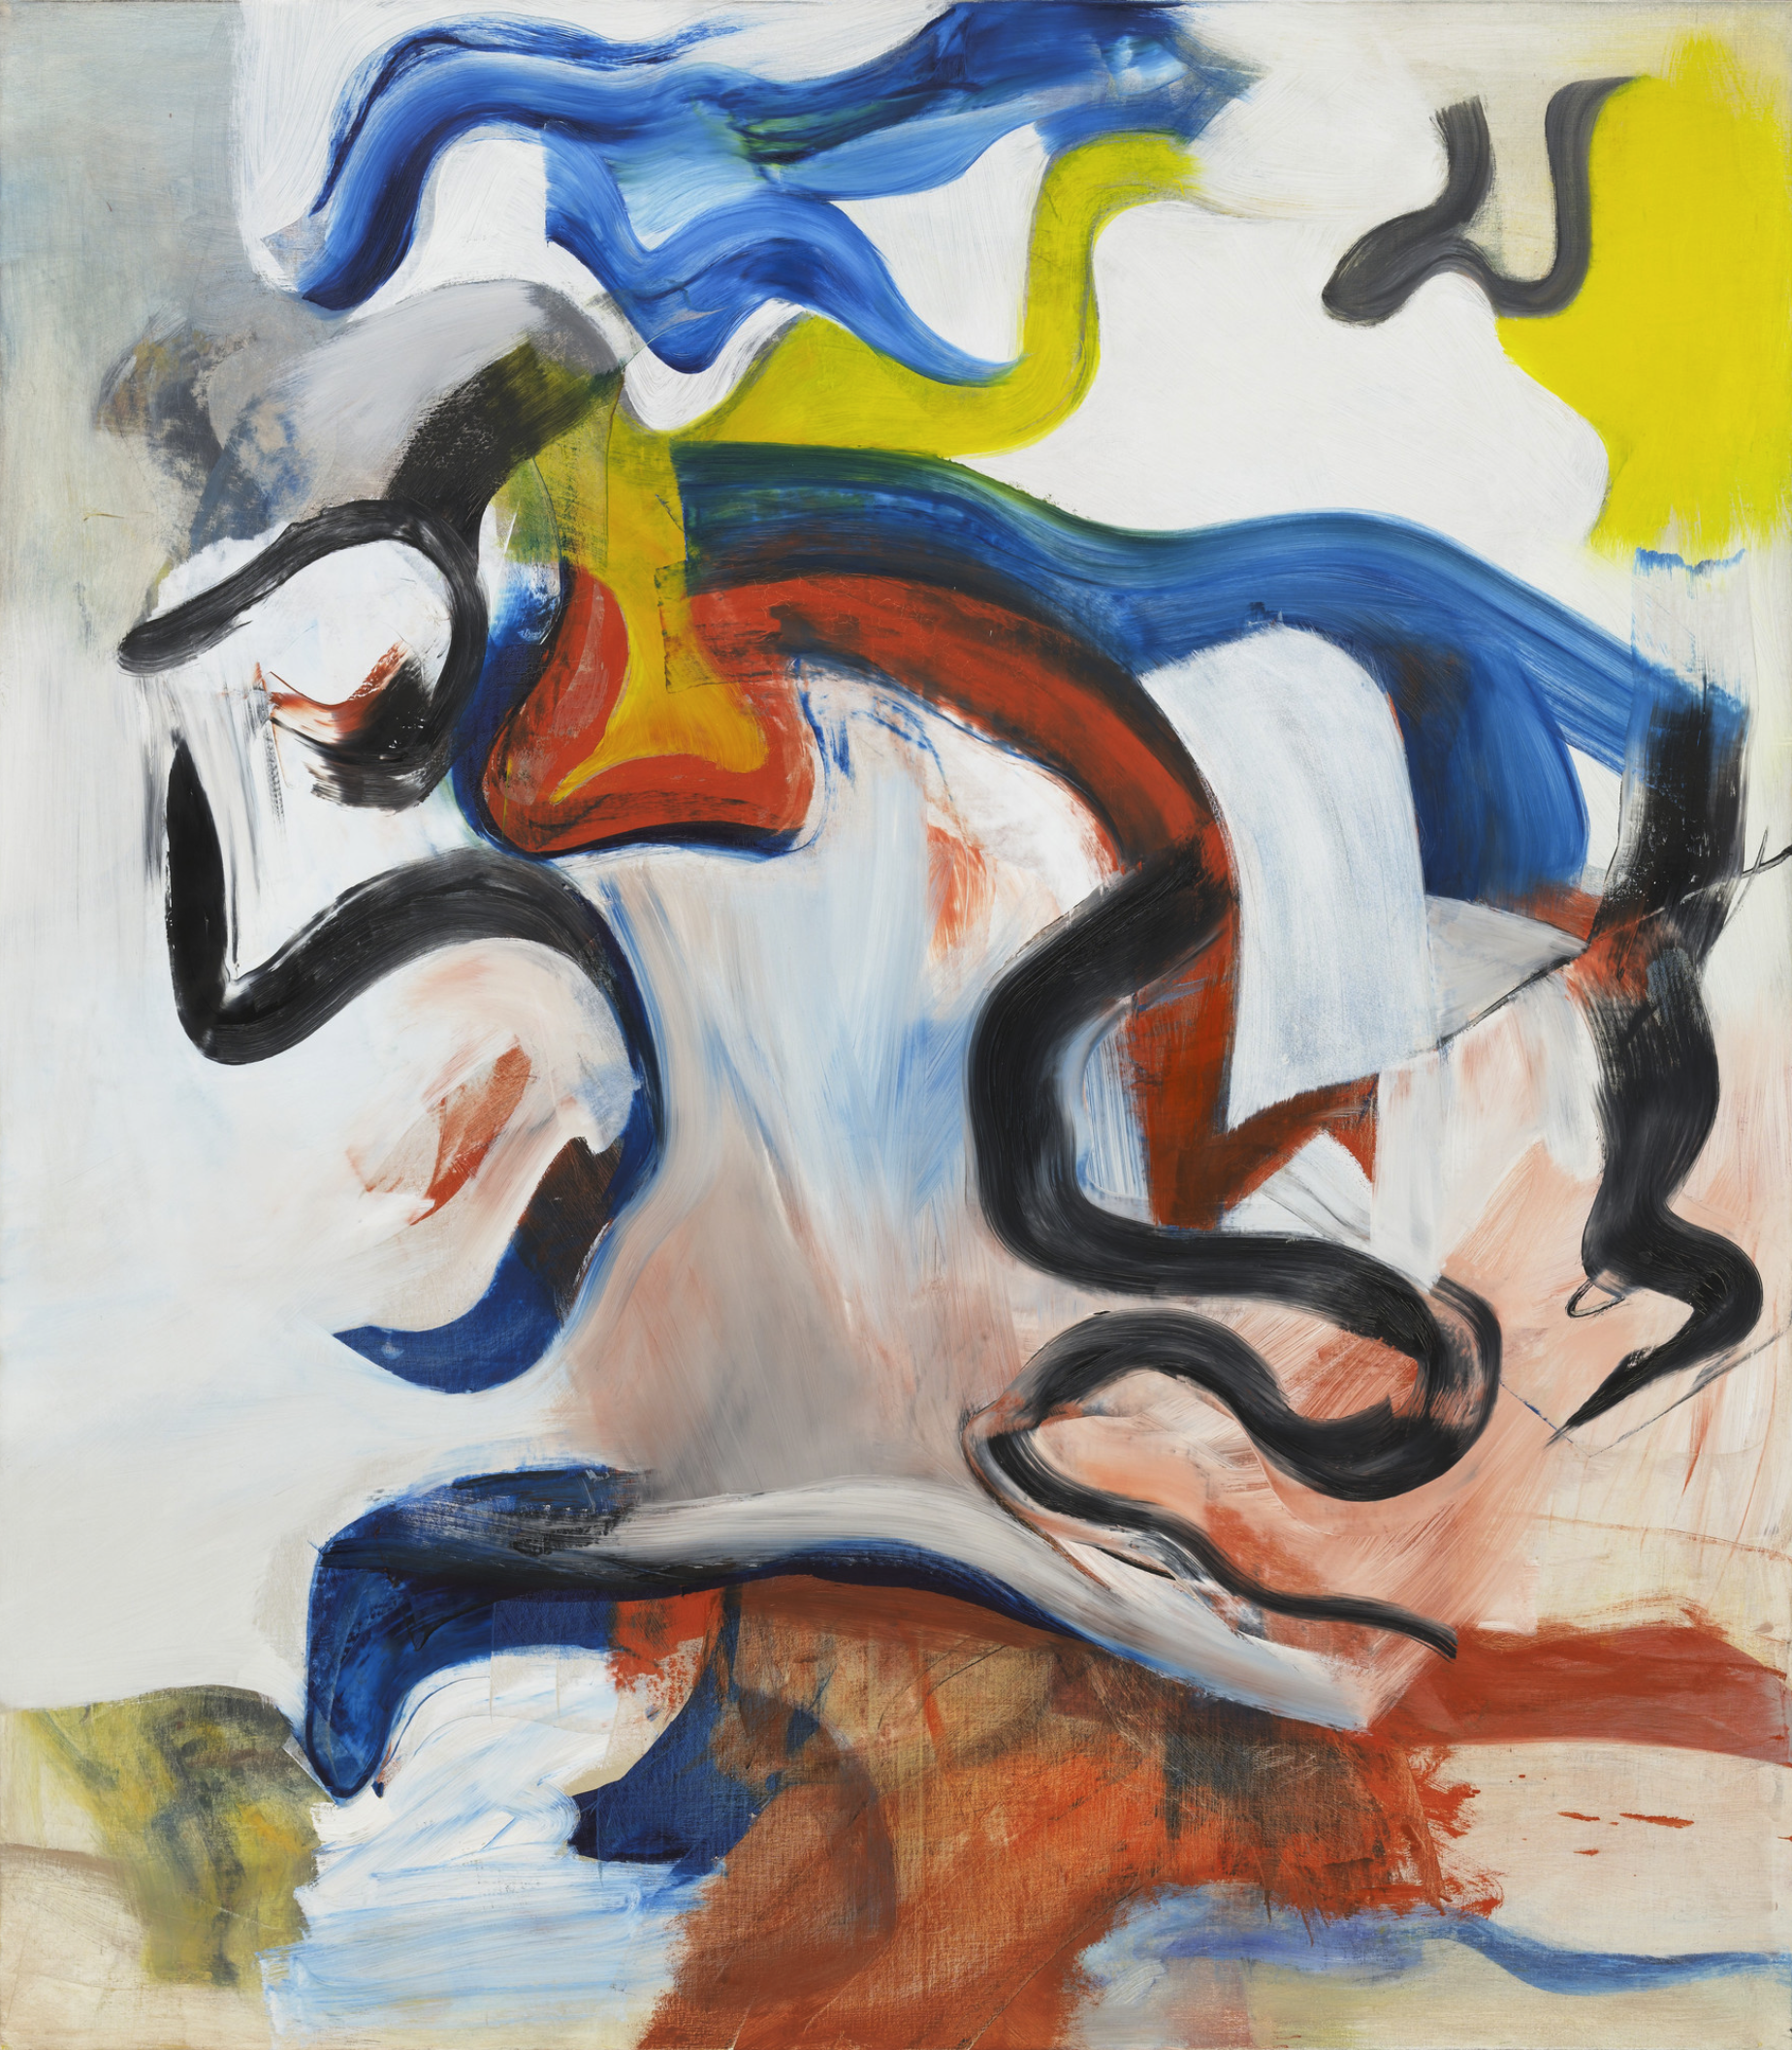 "Untitled V" by Willem de Kooning, 1982, an abstract painting with energetic 'S' and compound curves in vibrant blues, yellows, reds, and blacks on a dynamic and expressive background.